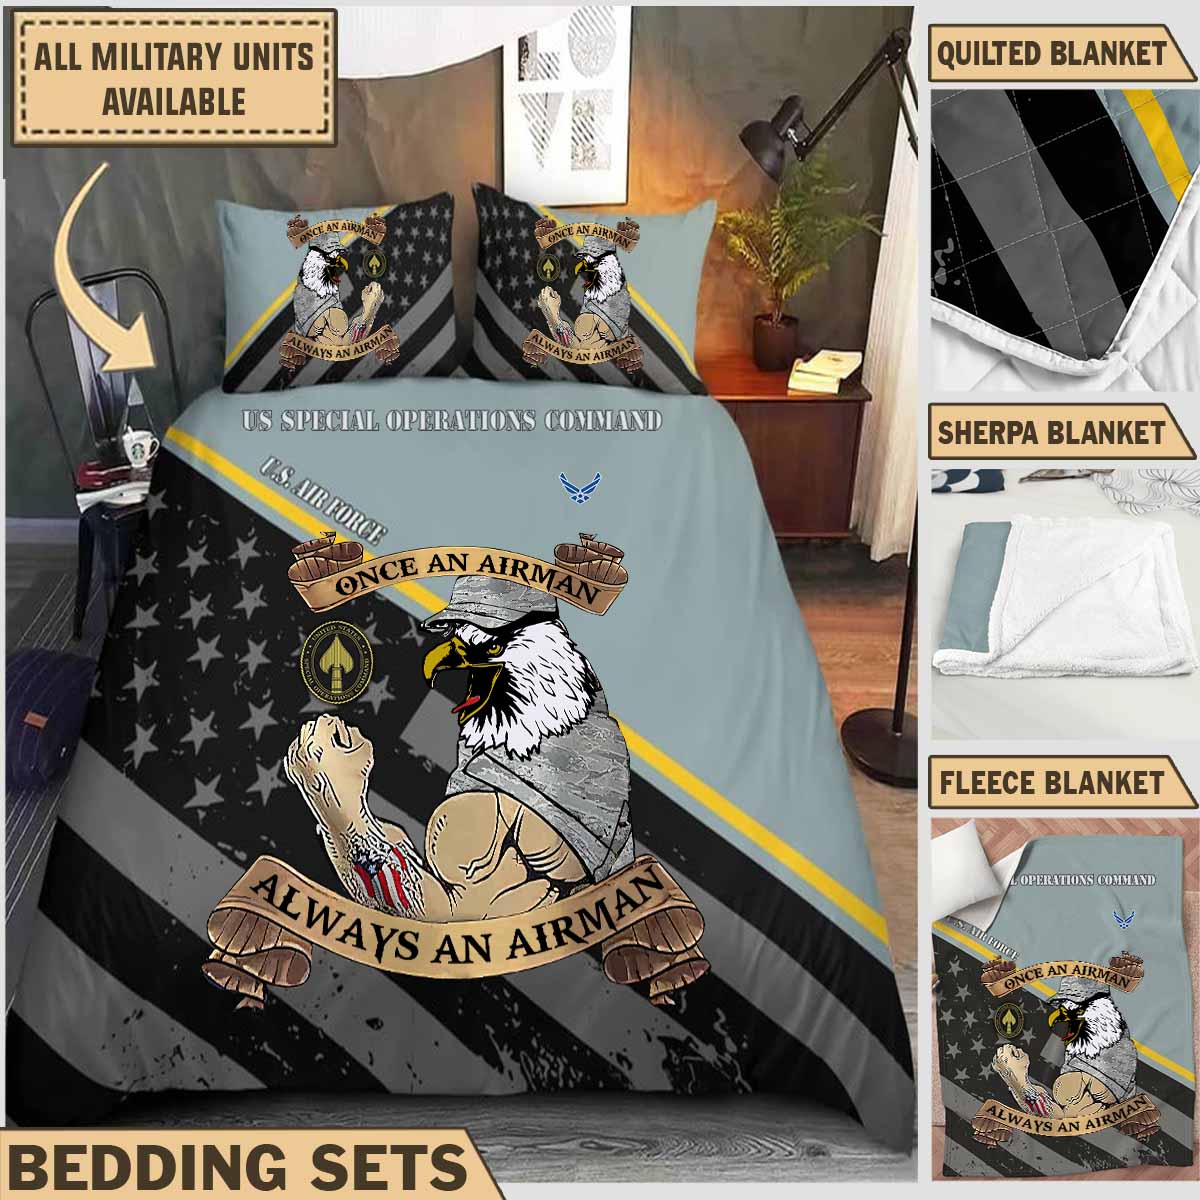 USSOCOM United States Special Operations Command_Bedding Collection